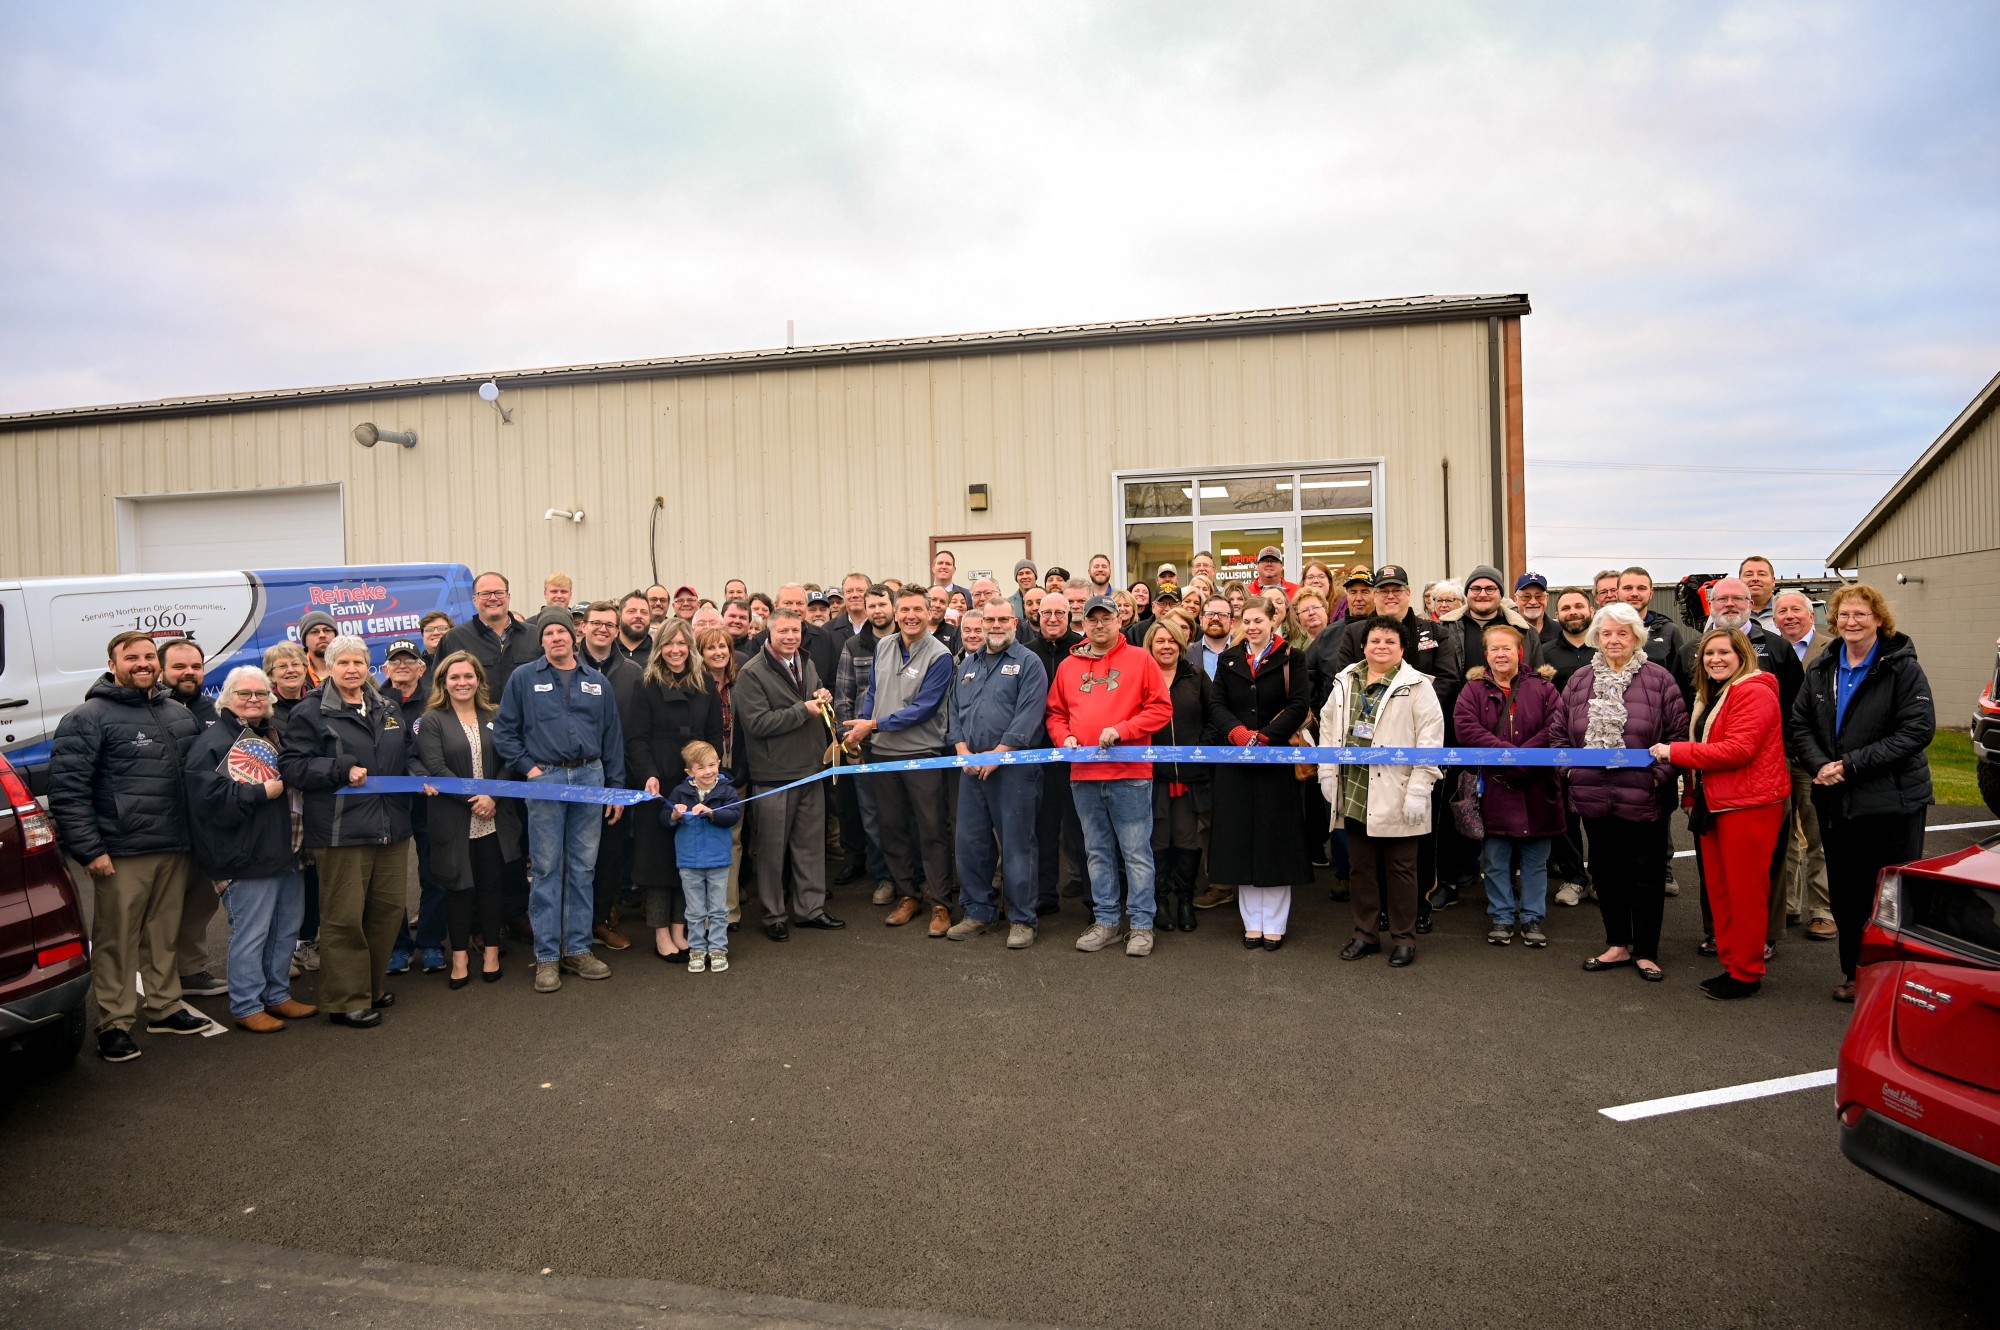 Reineke Family Collision Center Cuts Ribbon on Renovated Office Space and Warehouse